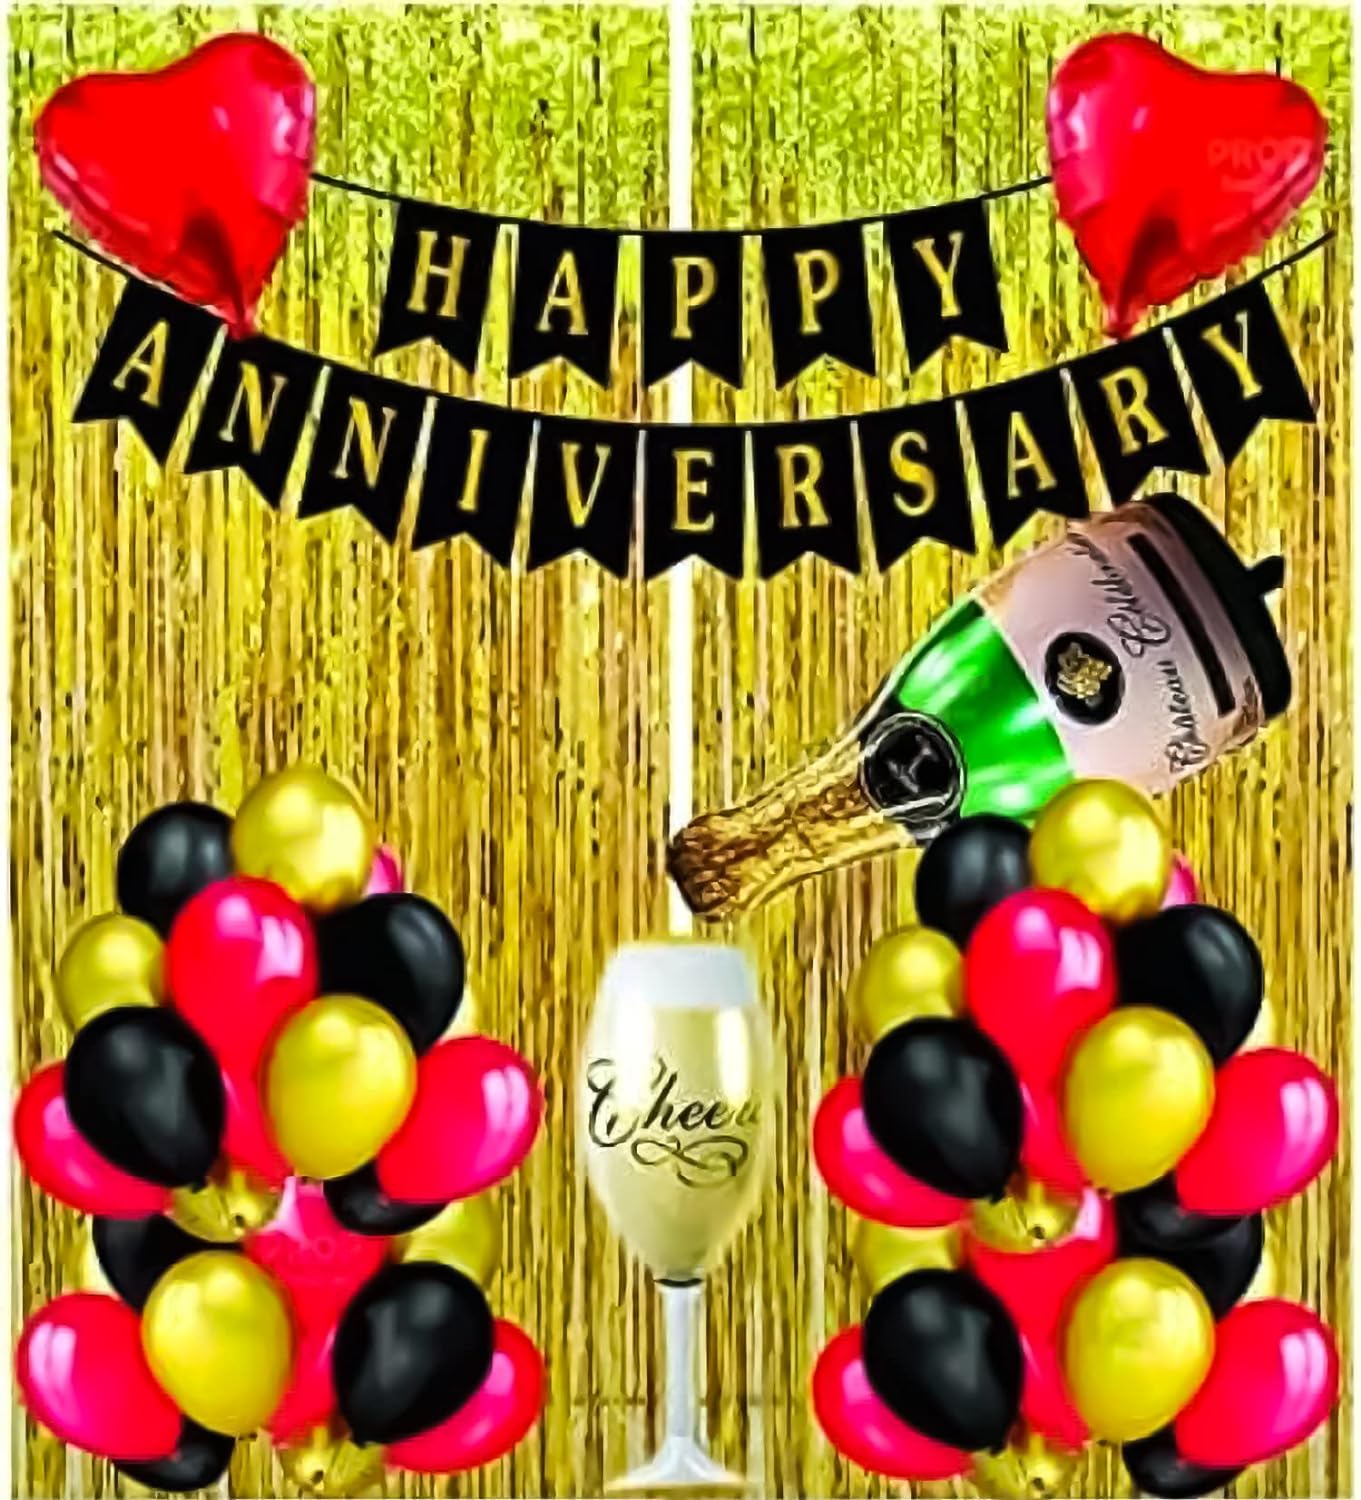 Cheers Your celebration with DIY Anniversary Kit